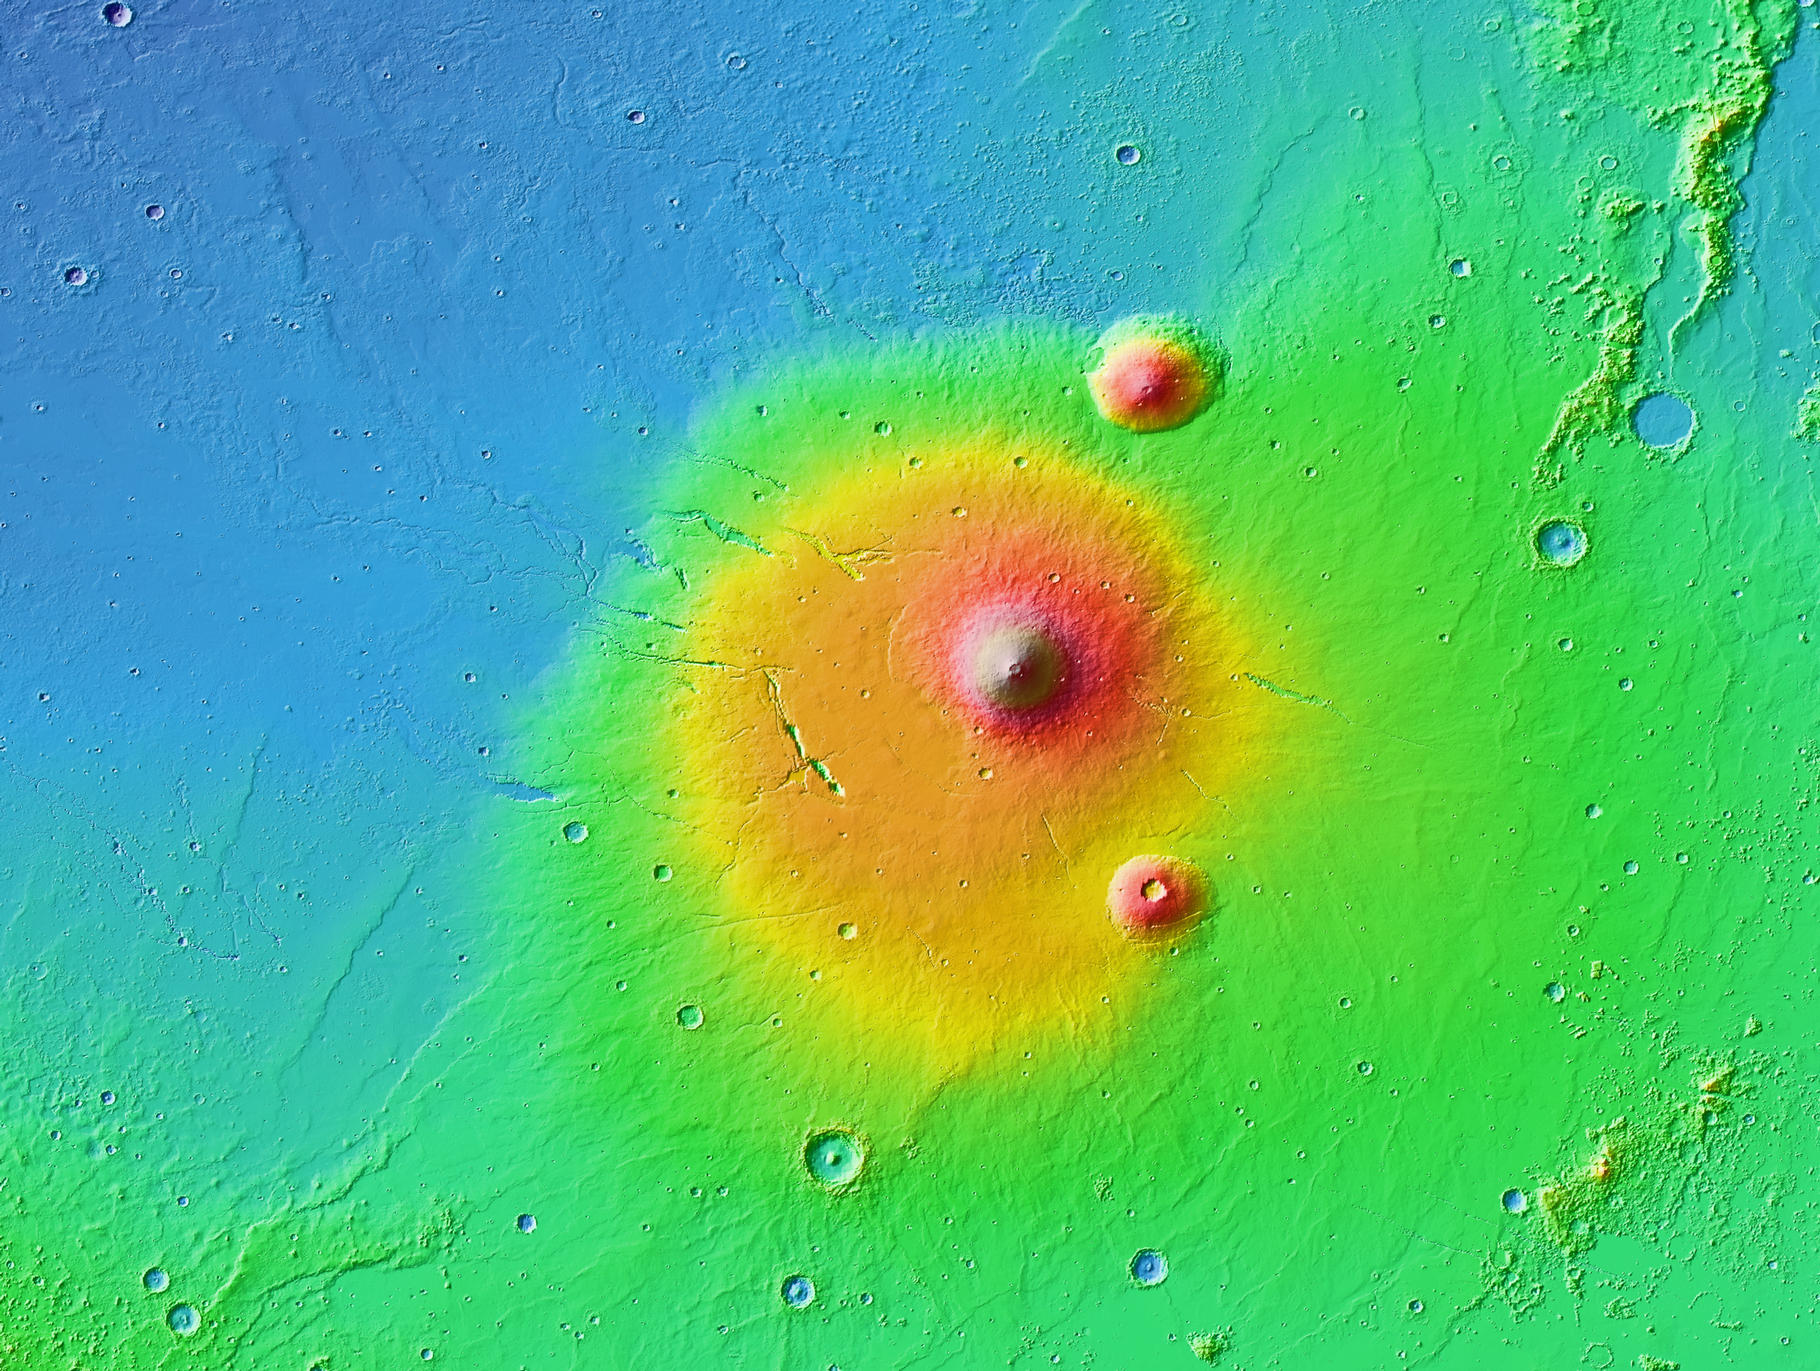 This is a colorized topographic map of the volcanic province Elysium, together with its surroundings, from the Mars Orbiter Laser Altimeter (MOLA) instrument of the Mars Global Surveyor spacecraft.